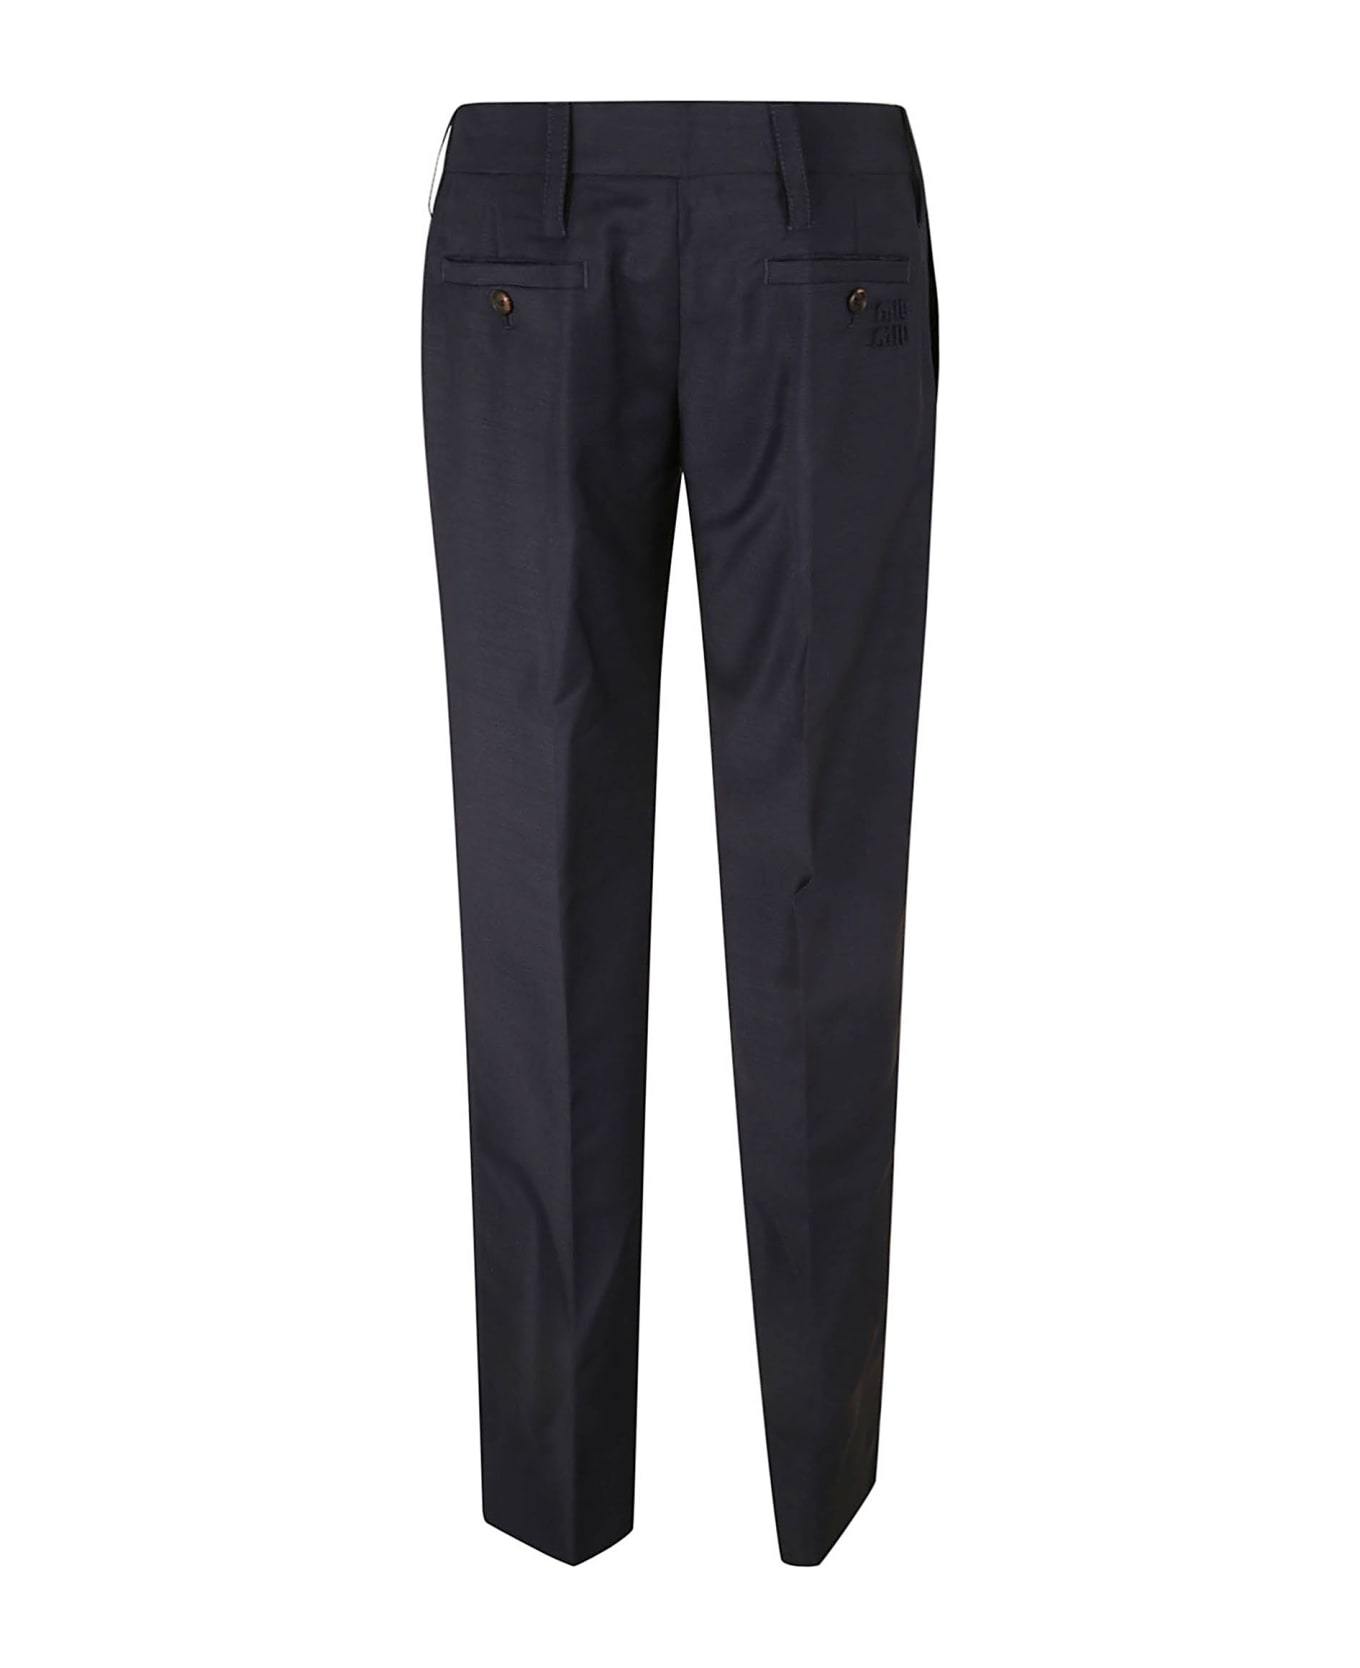 Miu Miu Fitted Classic Trousers - Navy ボトムス